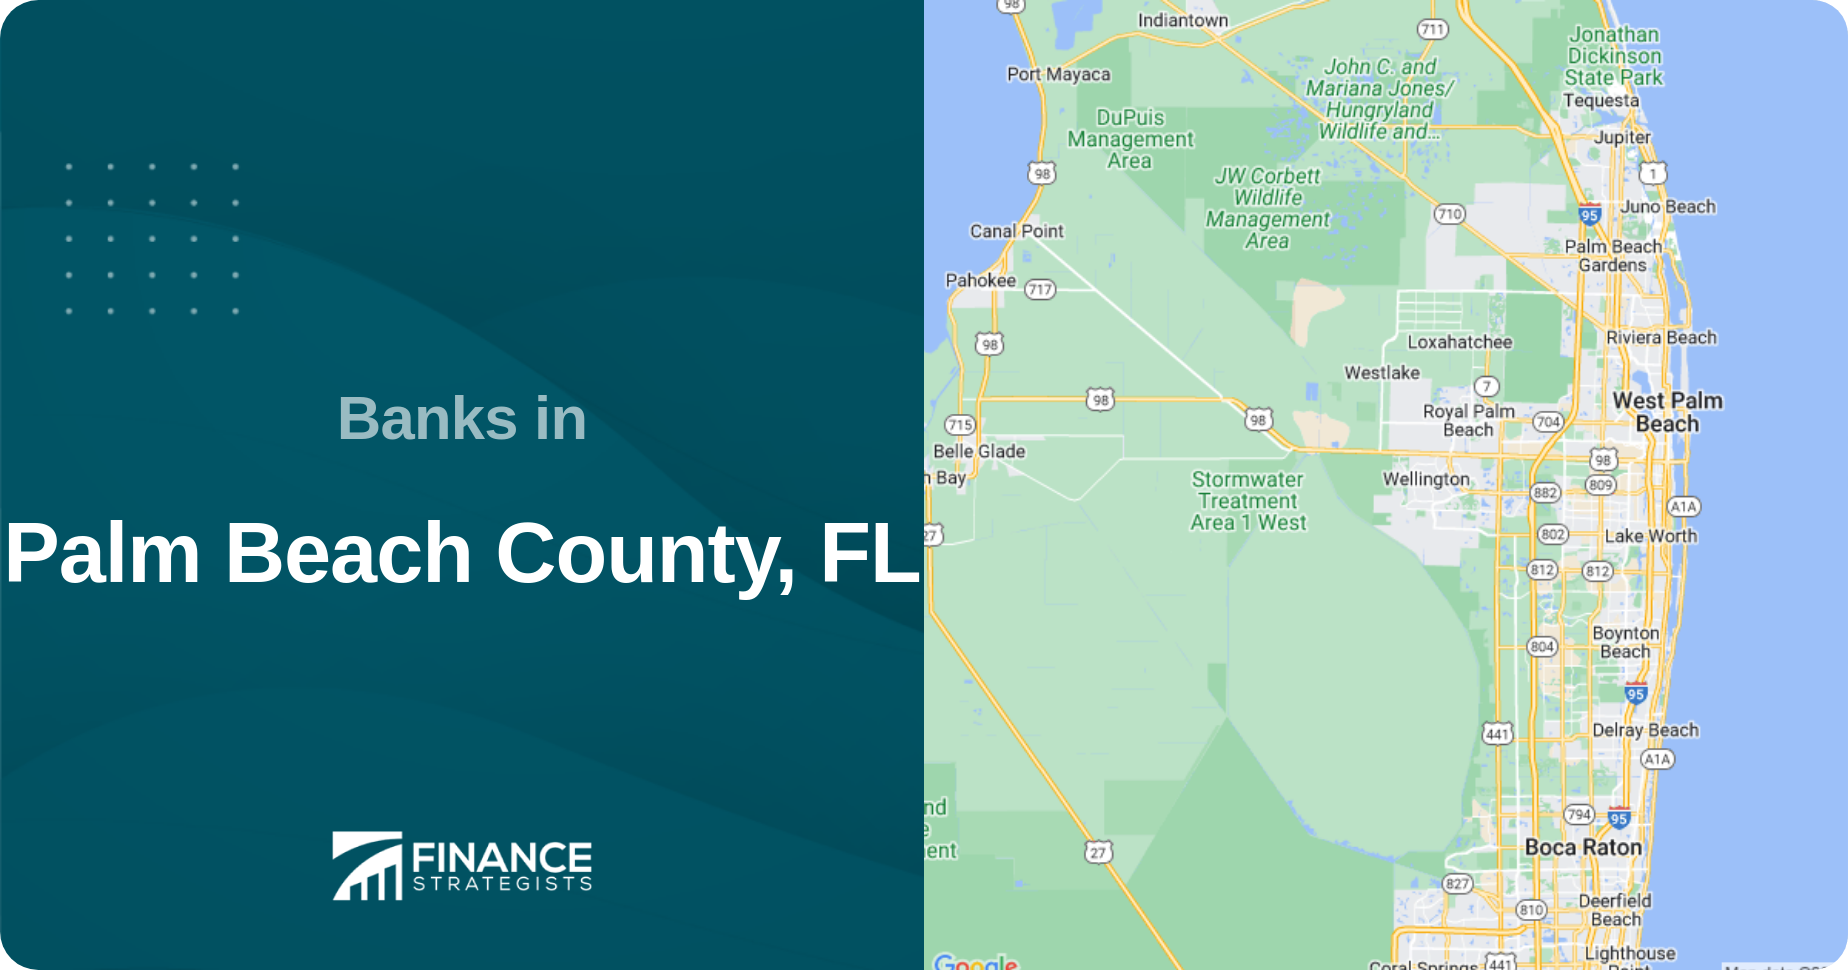 Banks in Palm Beach County, FL